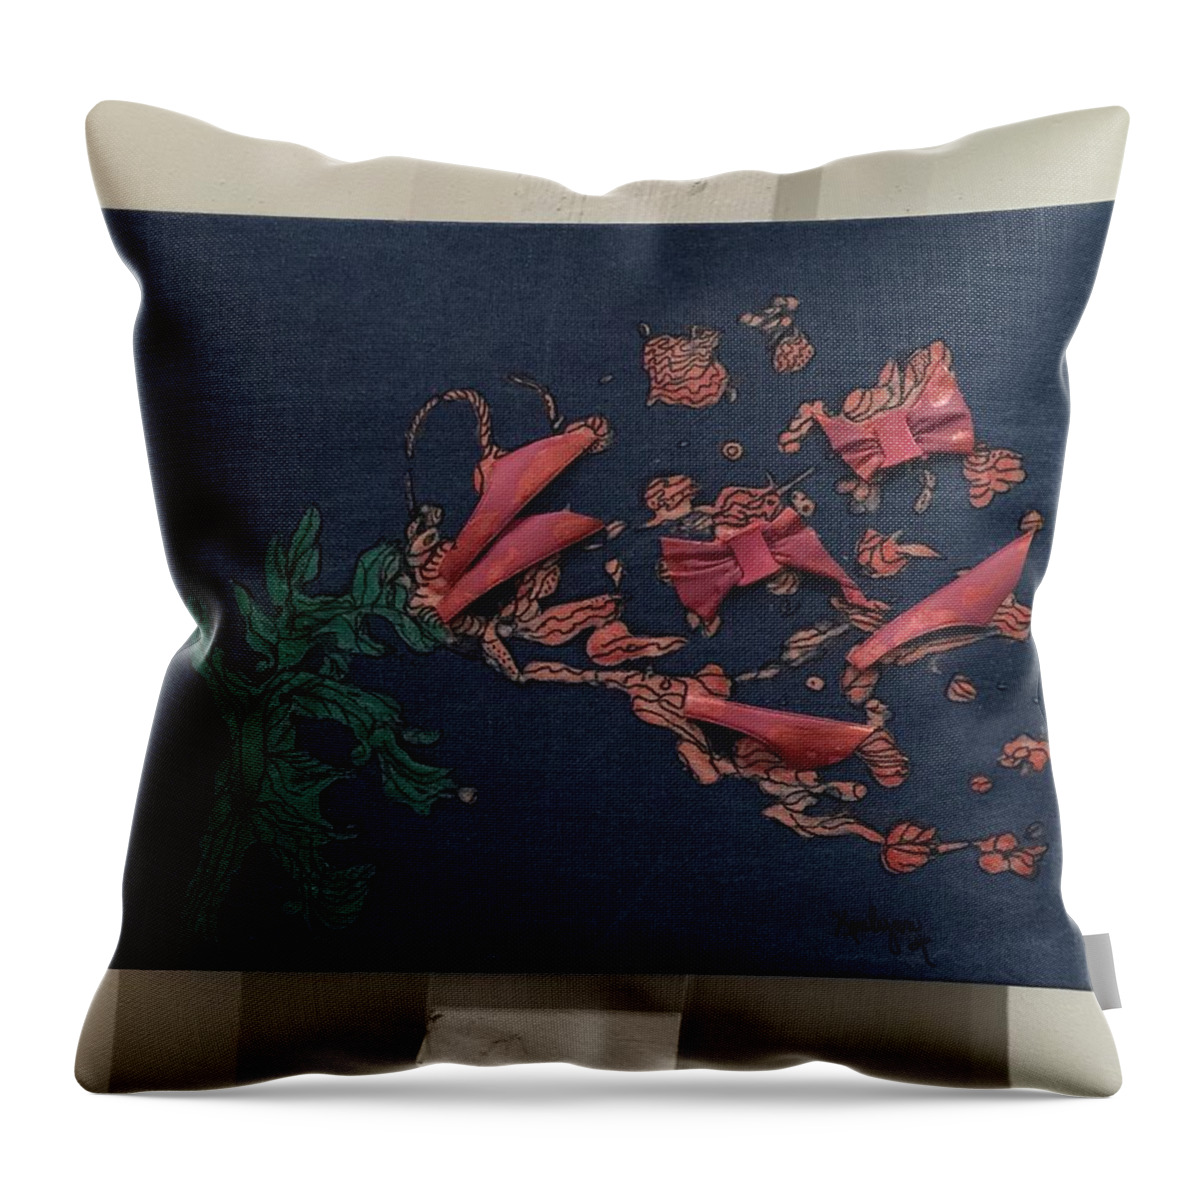 Pink Throw Pillow featuring the painting Pink Floral Fantasy by Kenlynn Schroeder